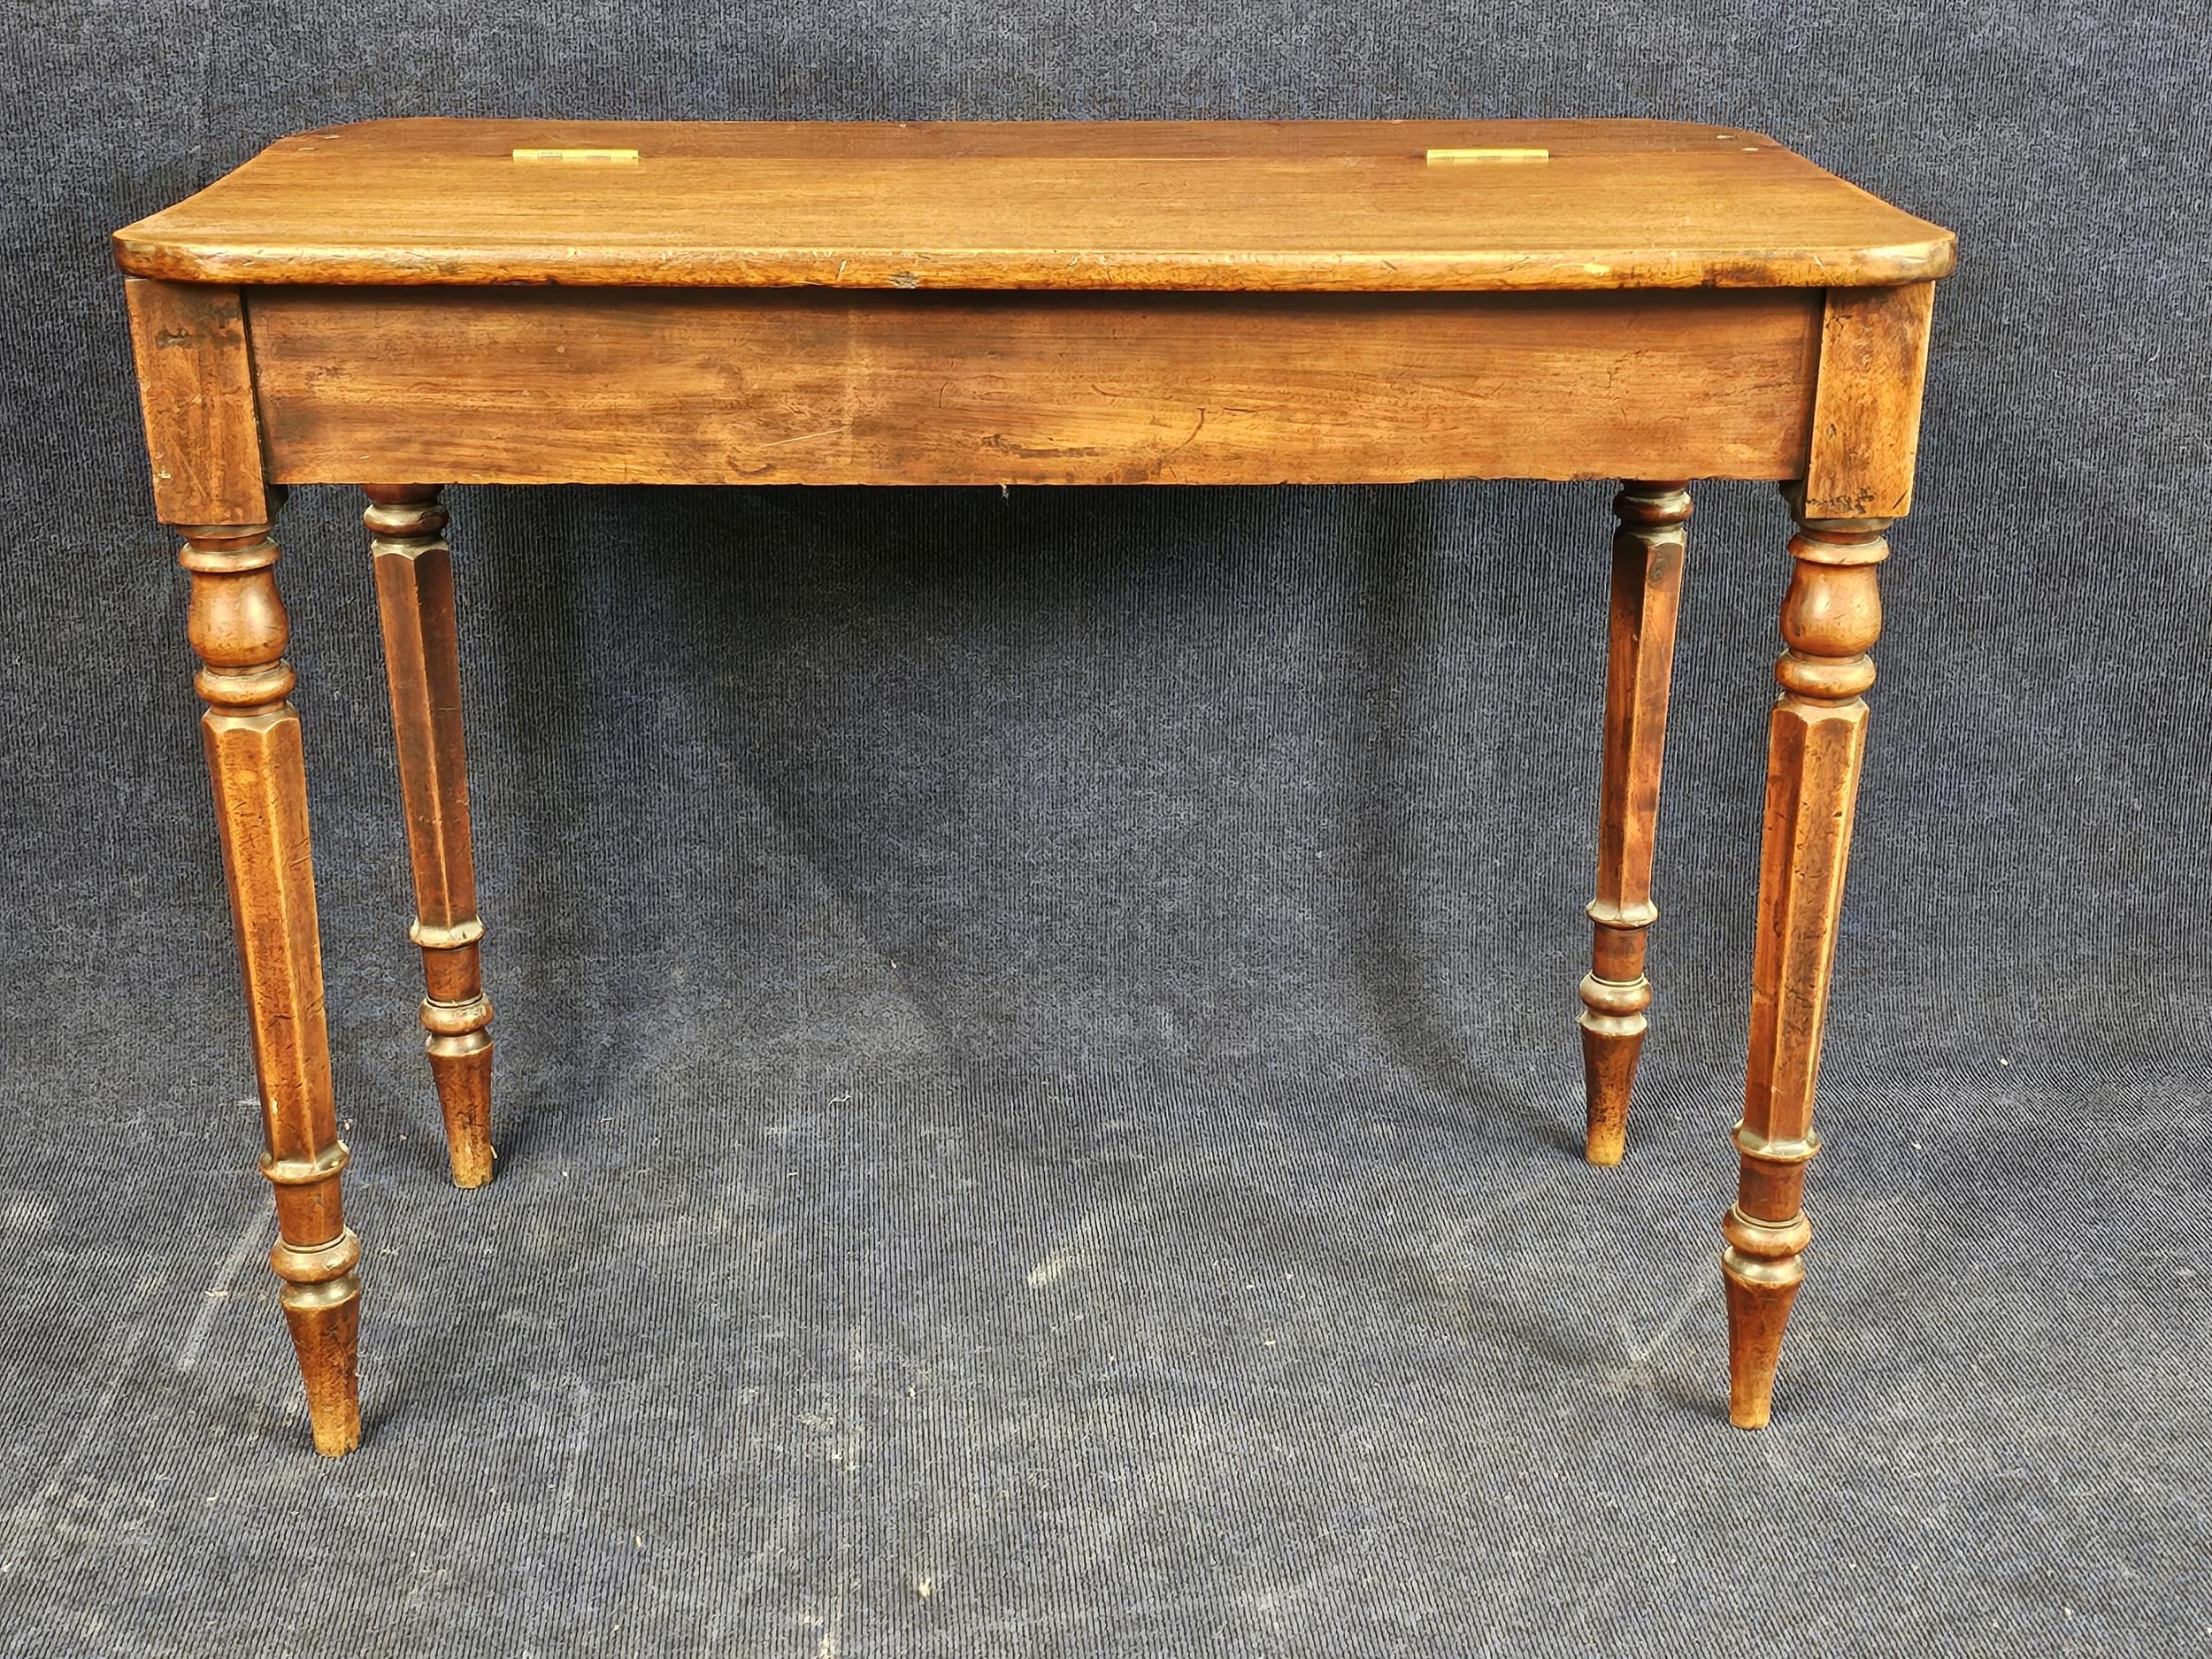 A George IV mahogany side table with hinged lid. H.75 W.95 D.52cm.